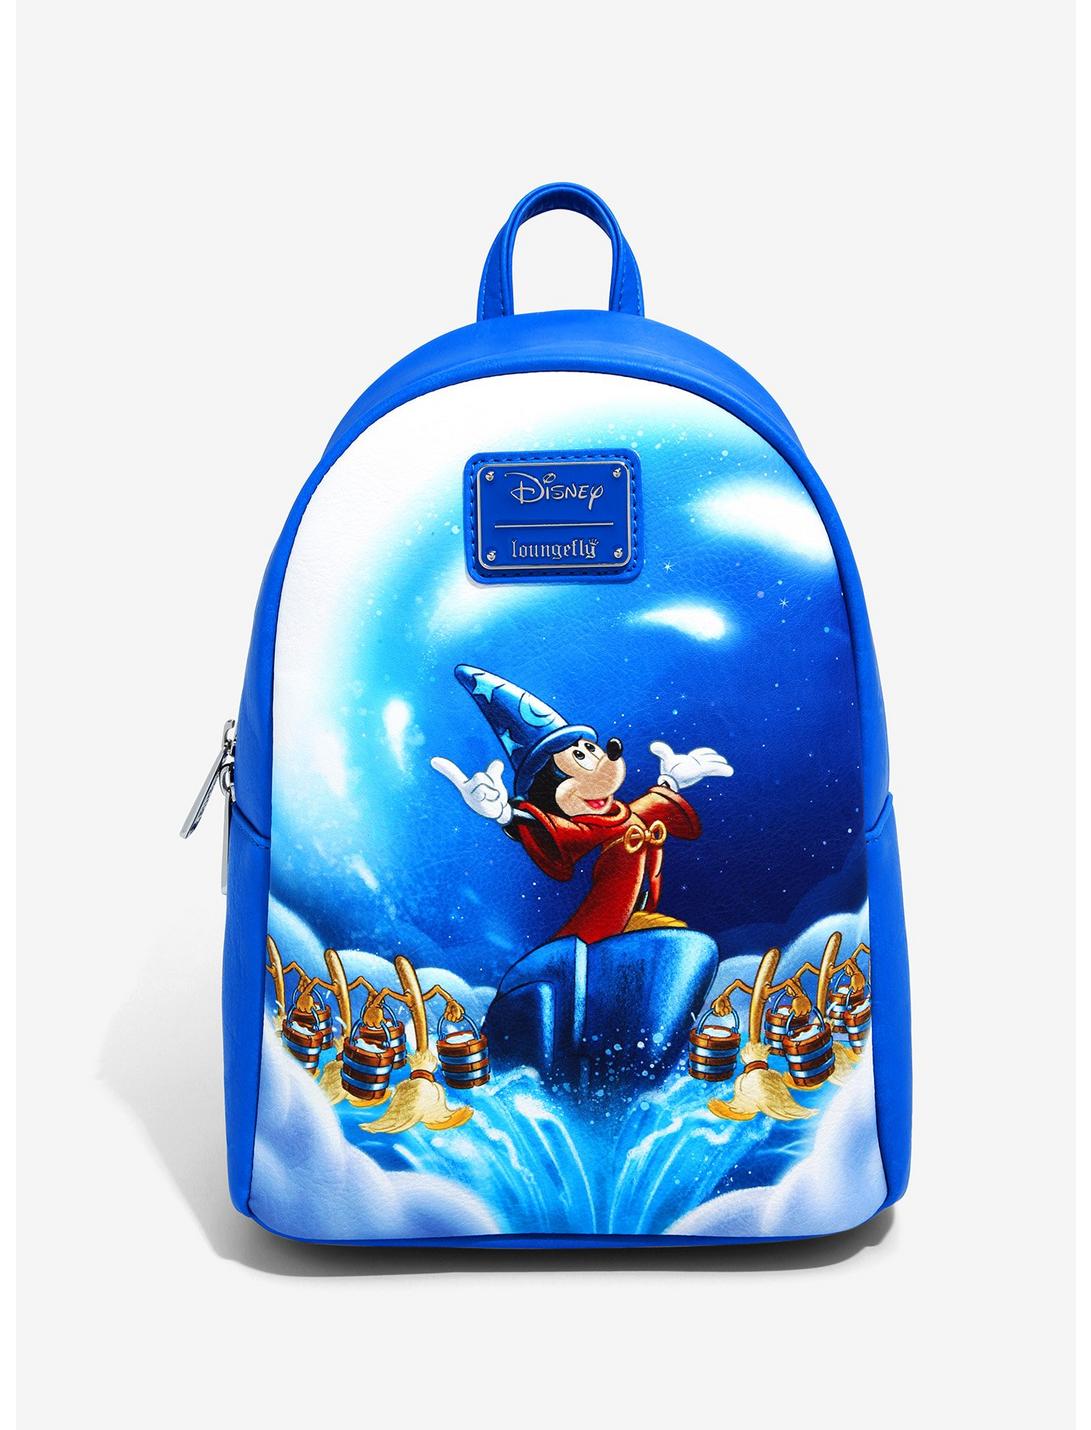 Loungefly Disney Fantasia Sorcerer Mickey Mouse Mini Backpack, , hi-res